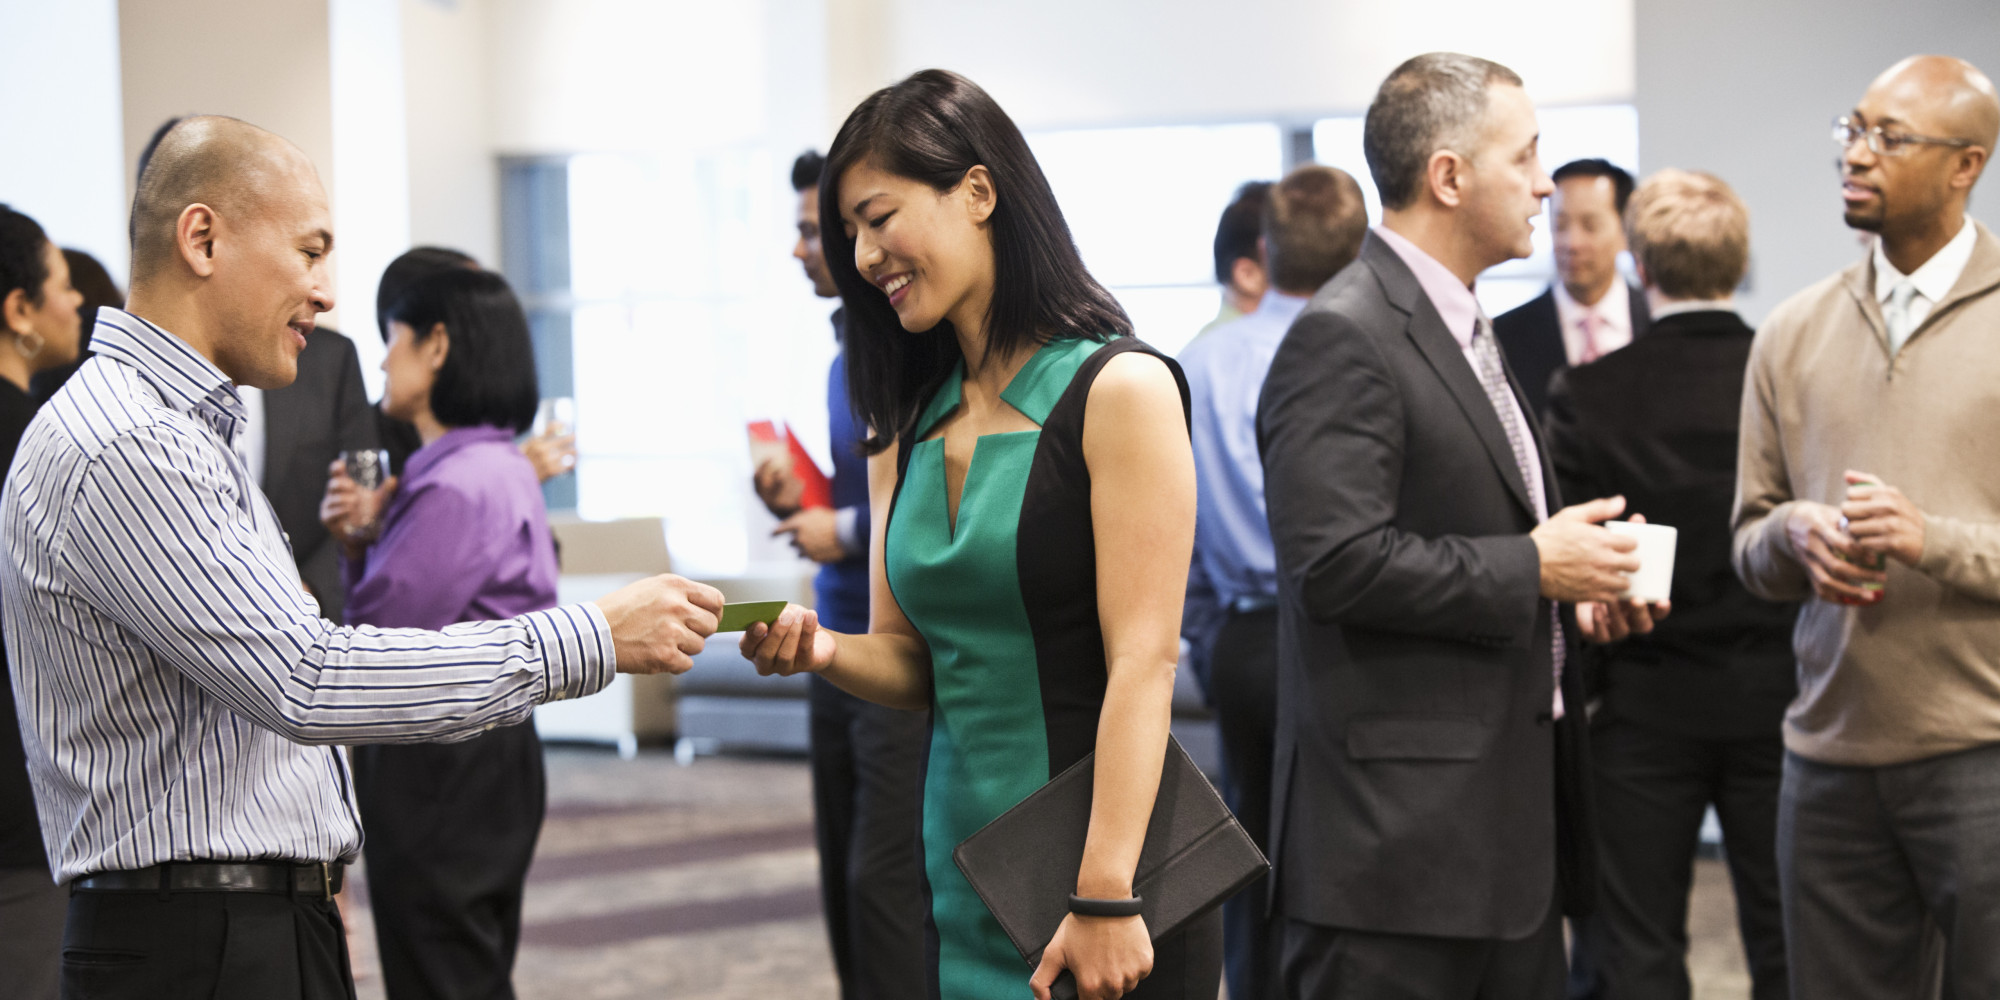 A man and woman exchanging business cards at a crowded networking opportunity at an event like our Learn EB-5 Seminar.